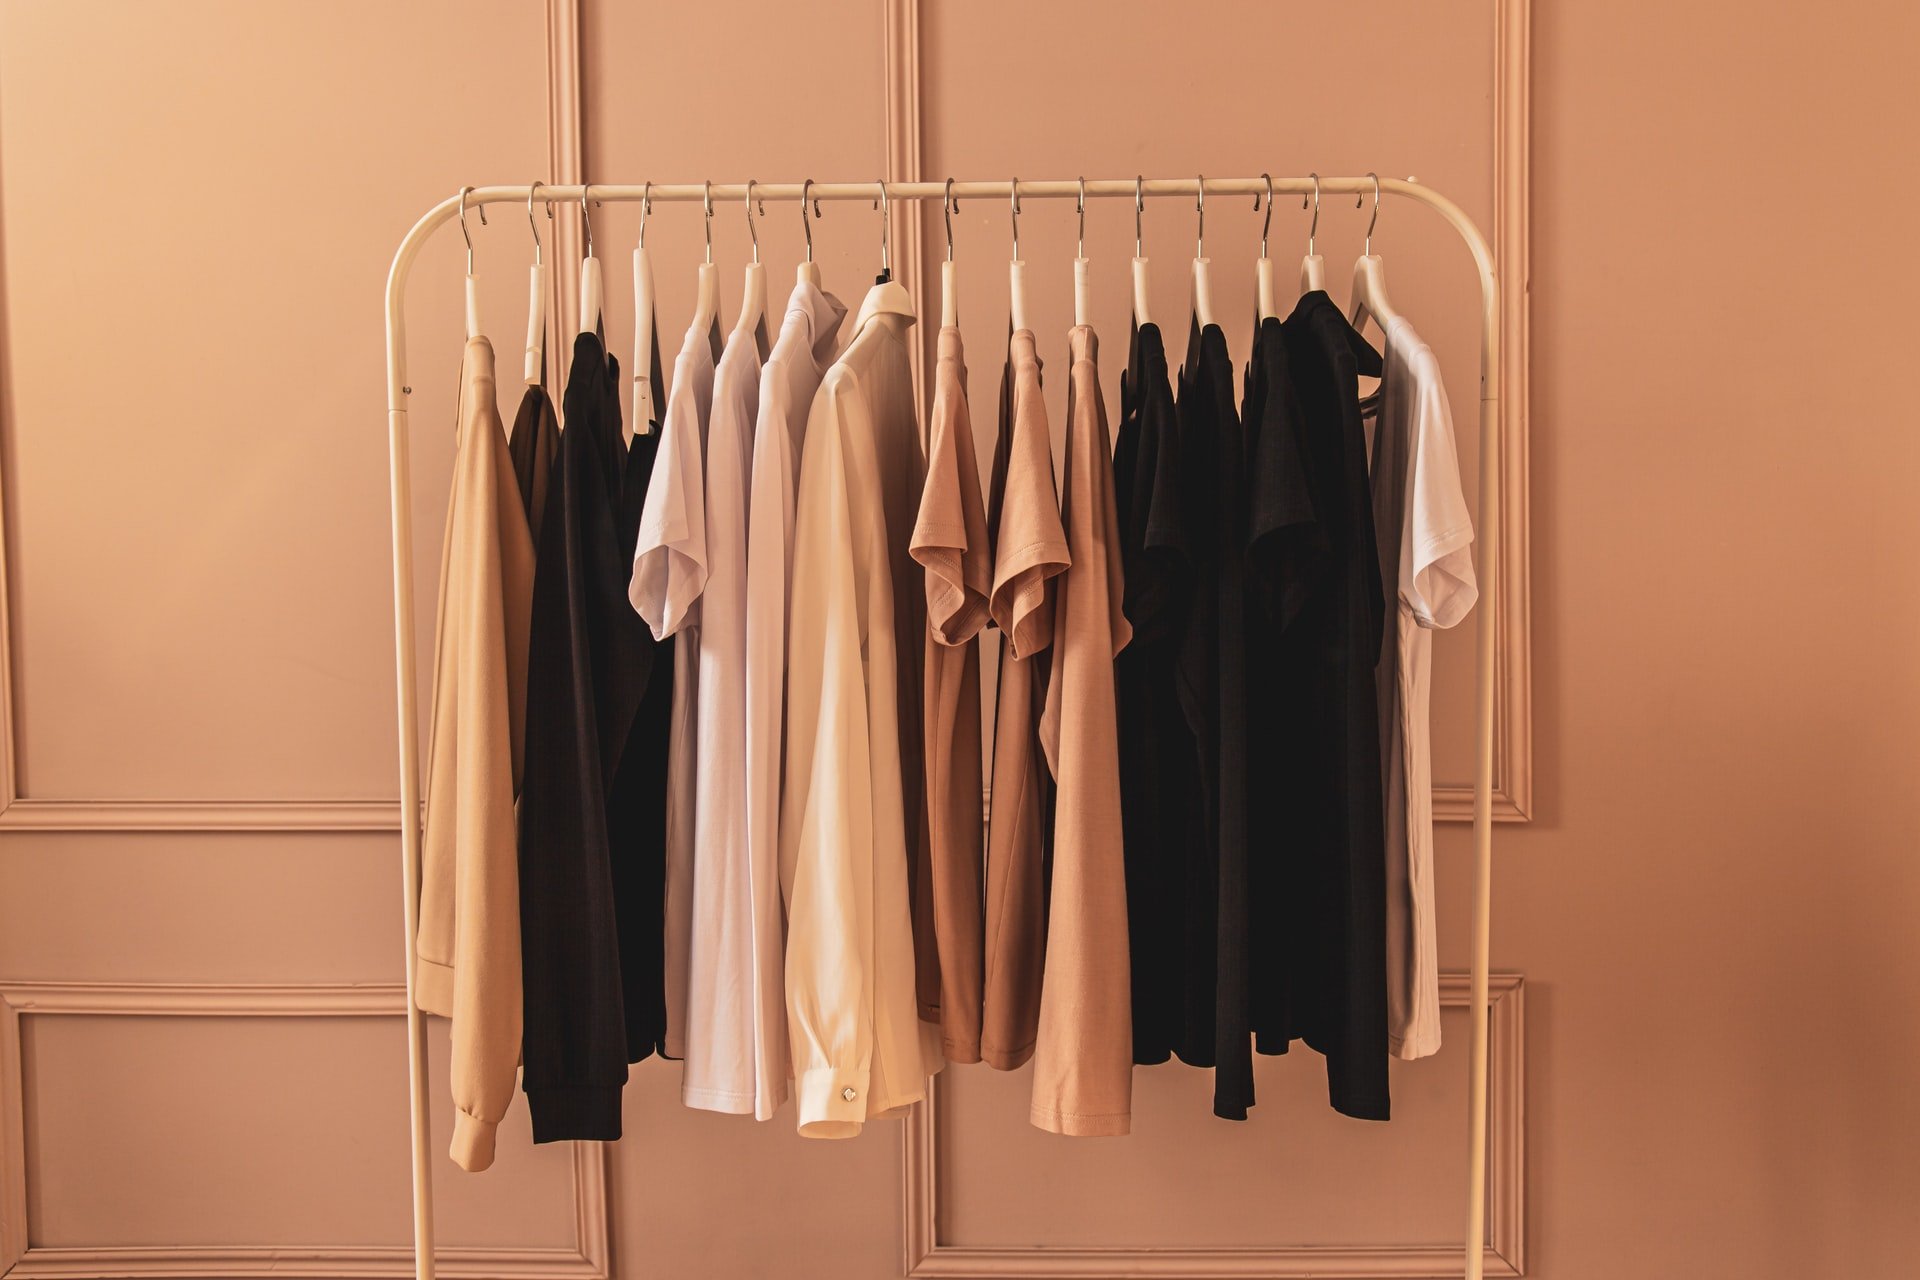 A 10-step guide to create your own sustainable wardrobe